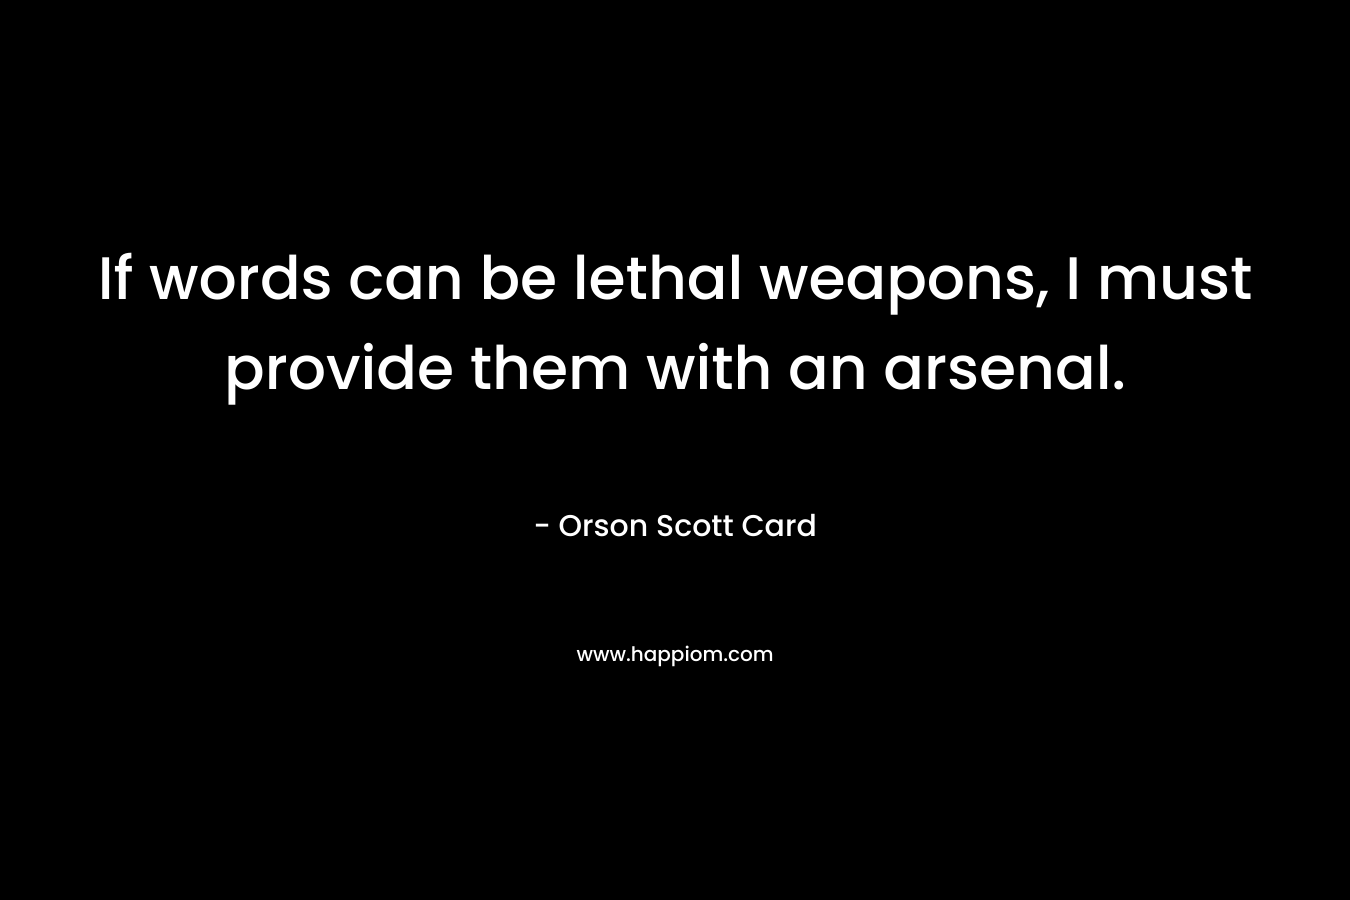 If words can be lethal weapons, I must provide them with an arsenal. – Orson Scott Card